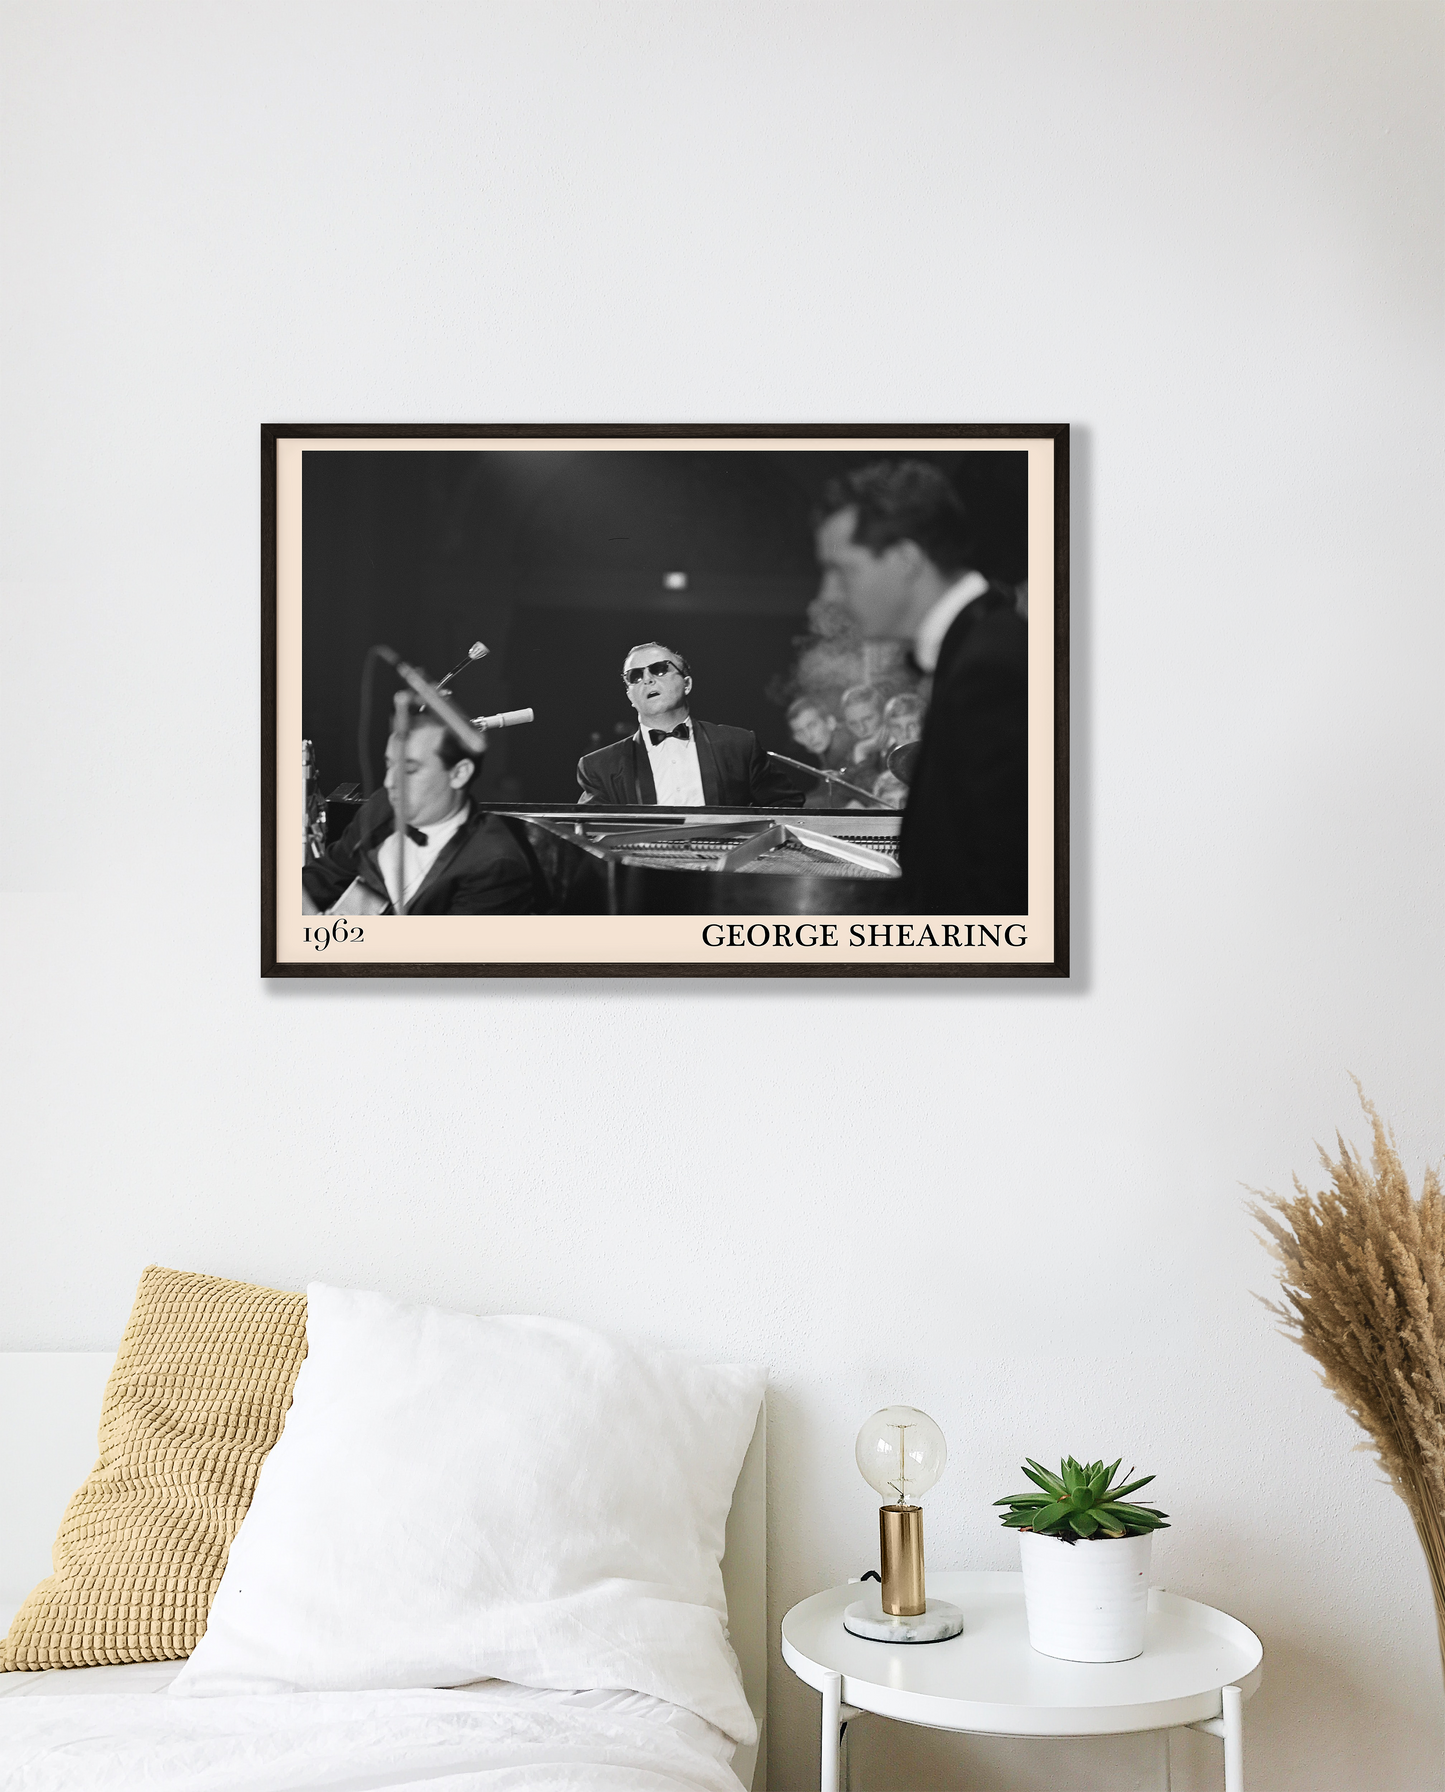 1962 picture of George Shearing playing piano. Picture crafted into a cool black framed music poster, with an off-white border. Poster is hanging on a white bedroom wall